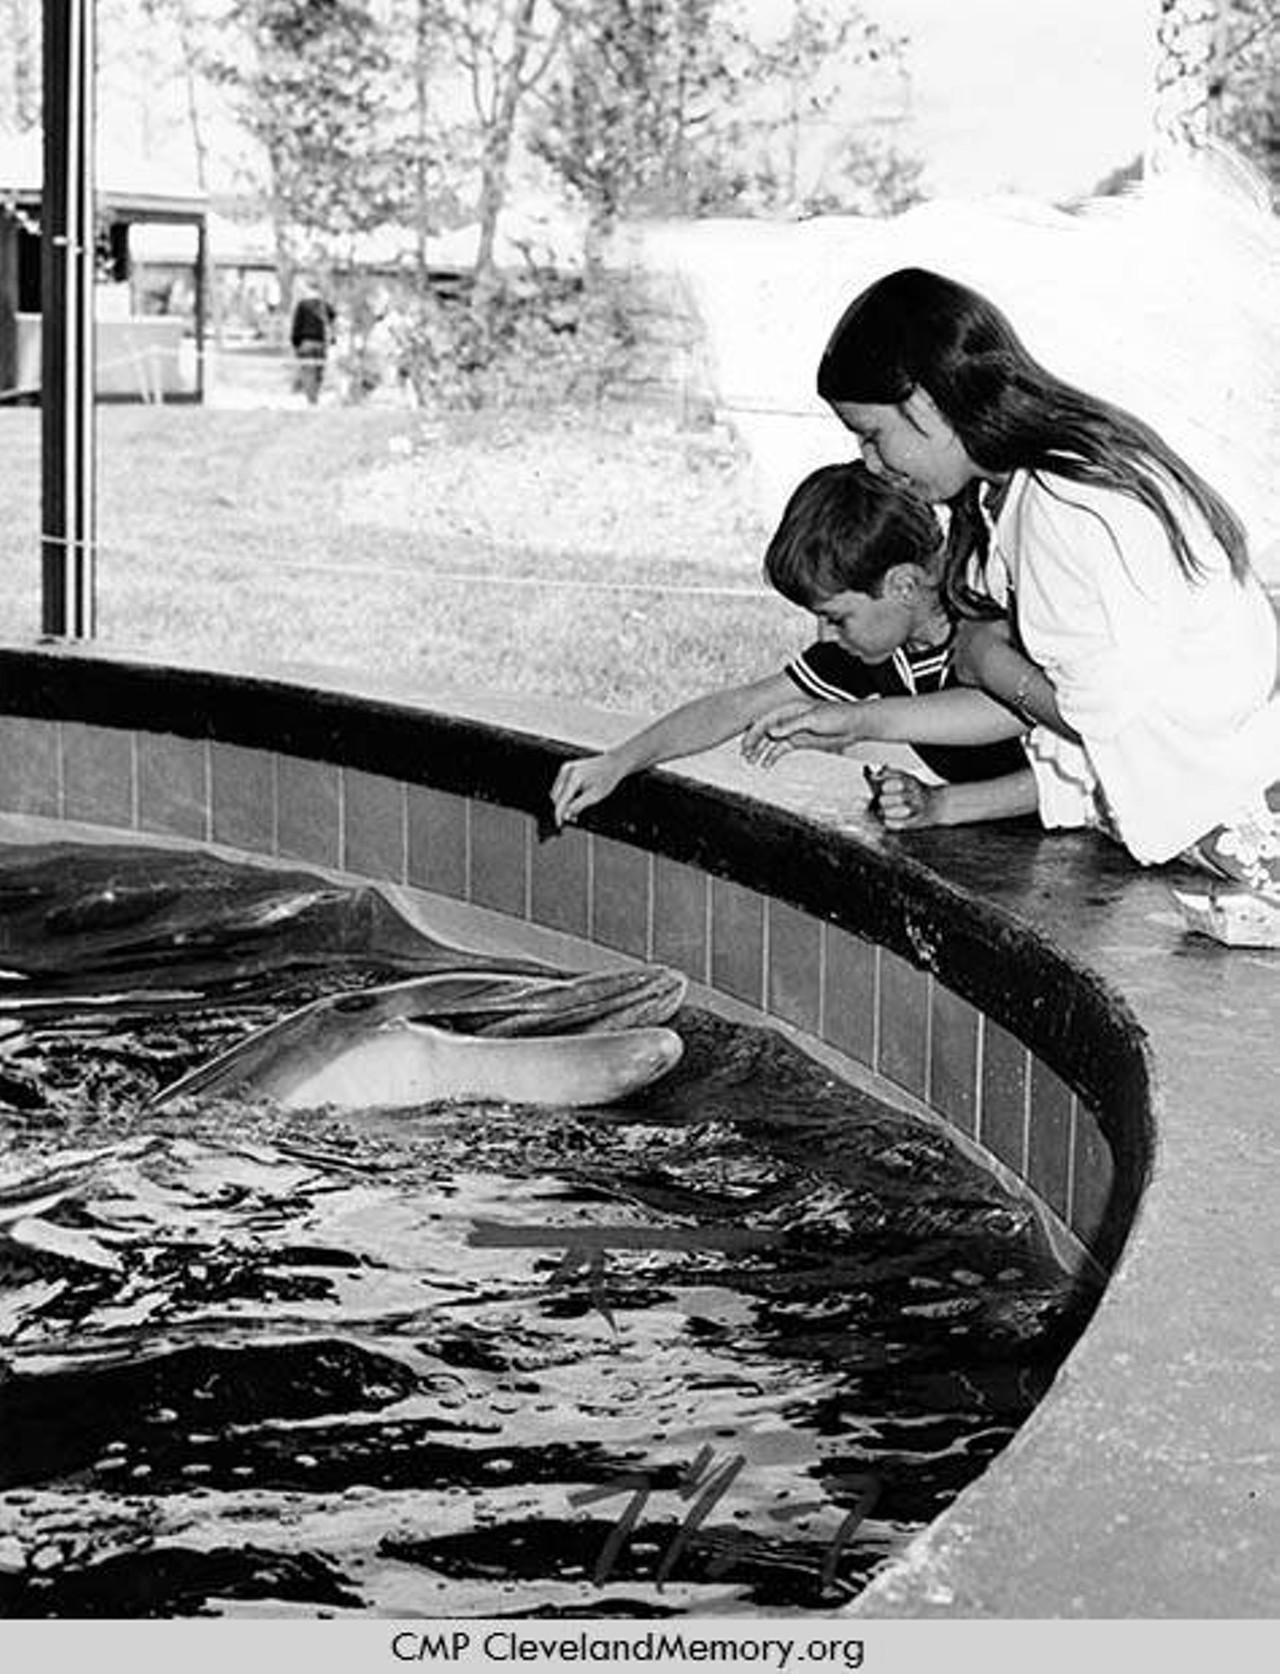  Children and Dolphin, 1970 